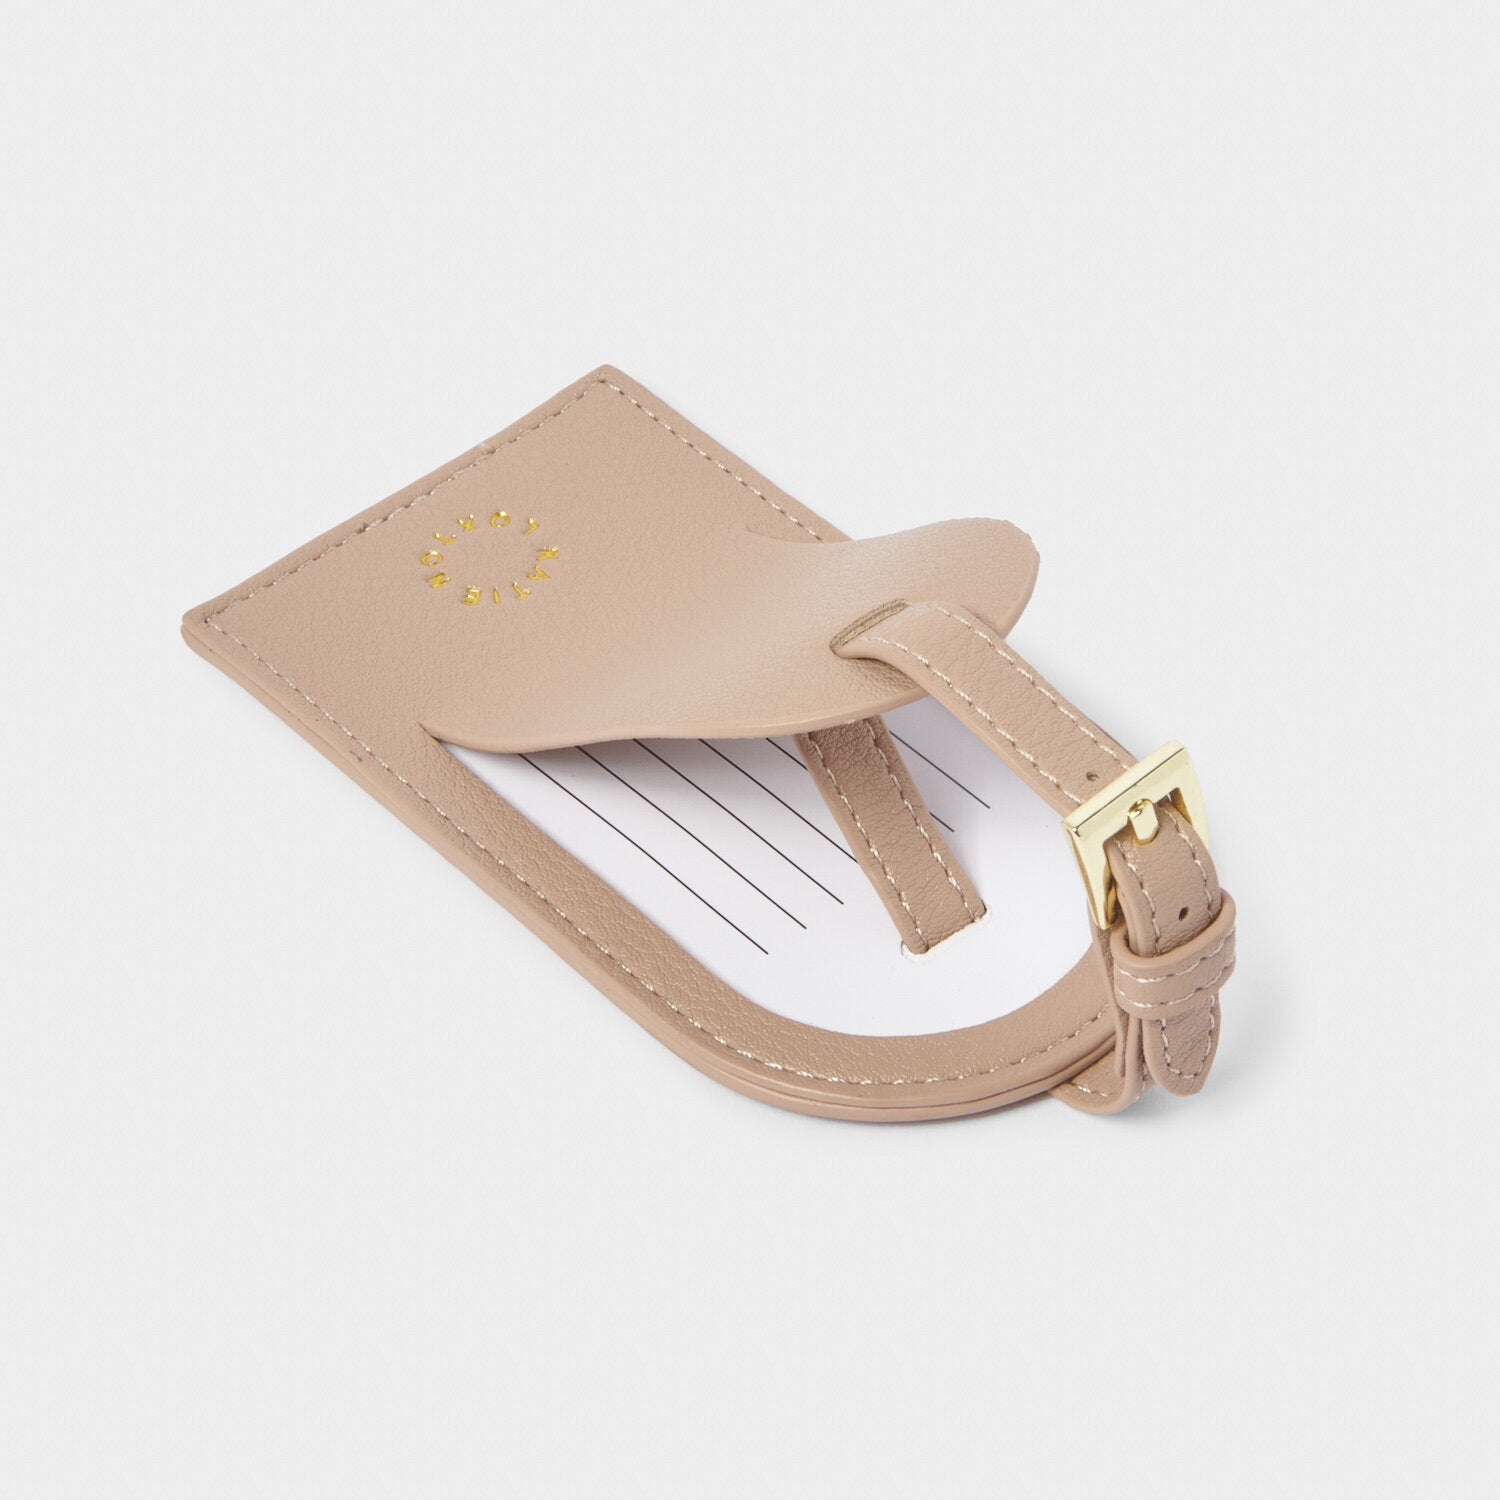 Luggage Tag 'Forever Exploring' - Soft Tan - Katie Loxton